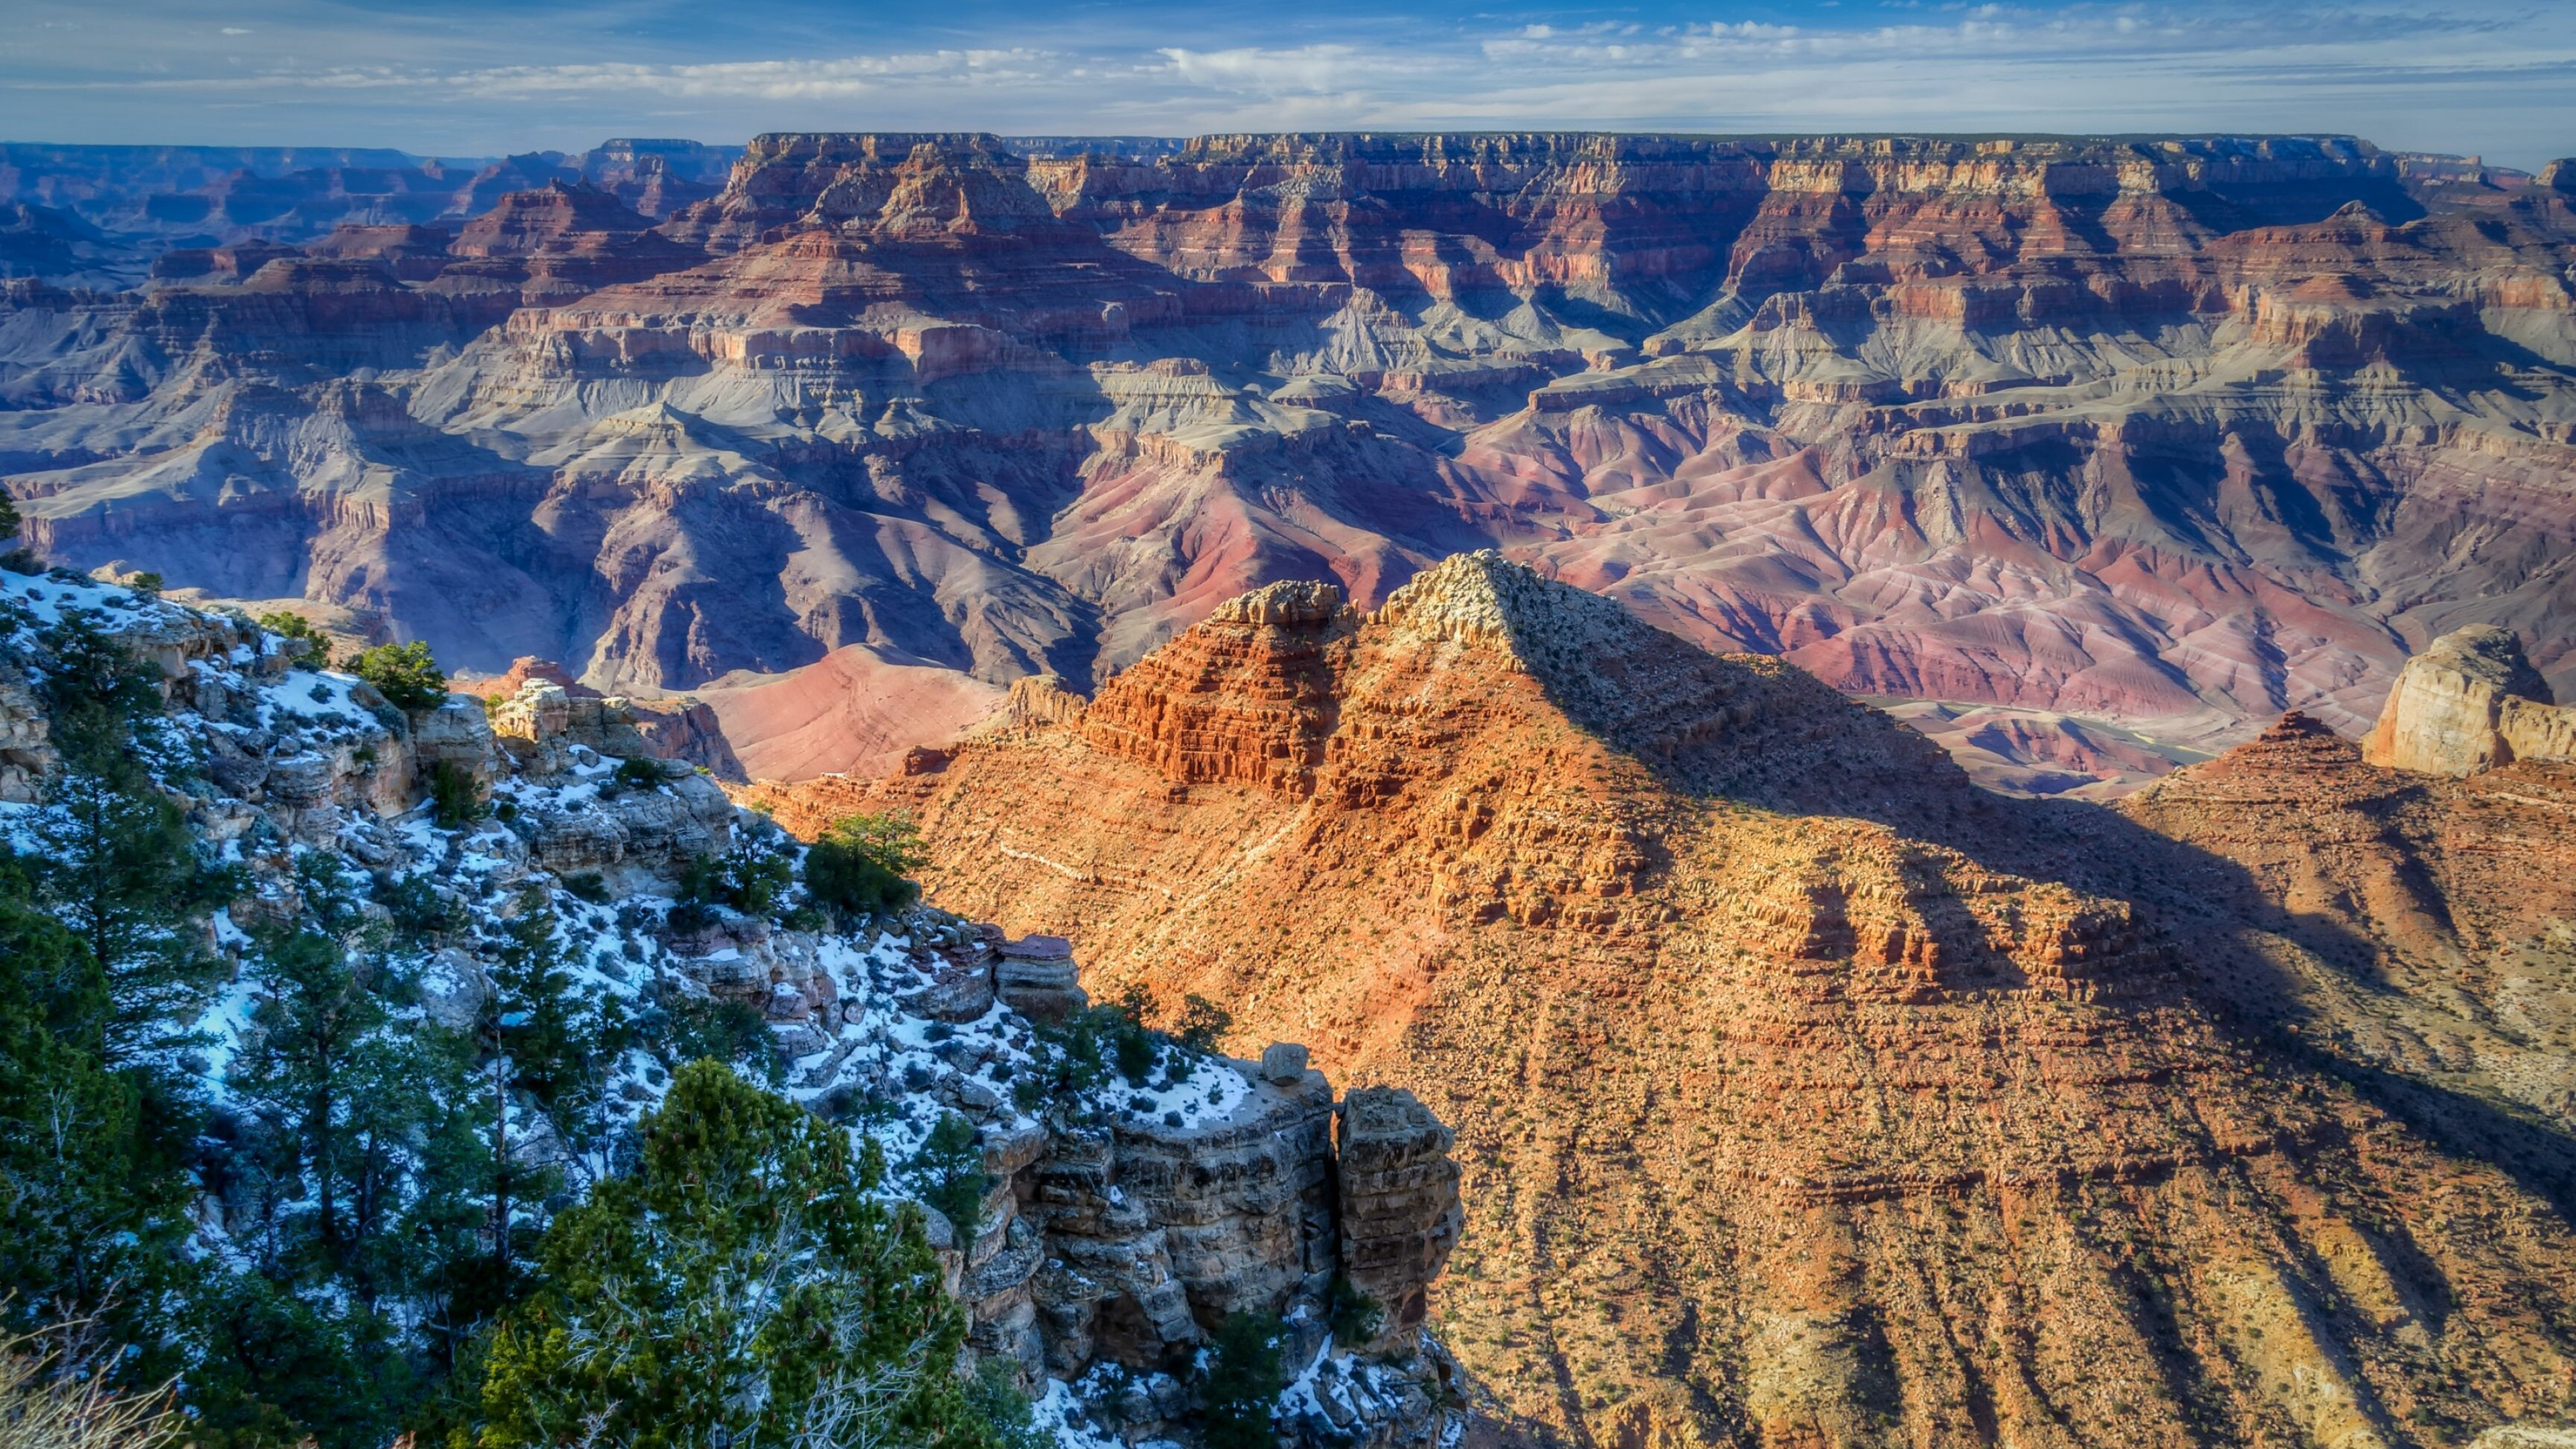 Grand Canyon: One of the Seven Natural Wonders of the World, 277 miles long. 3840x2160 4K Background.